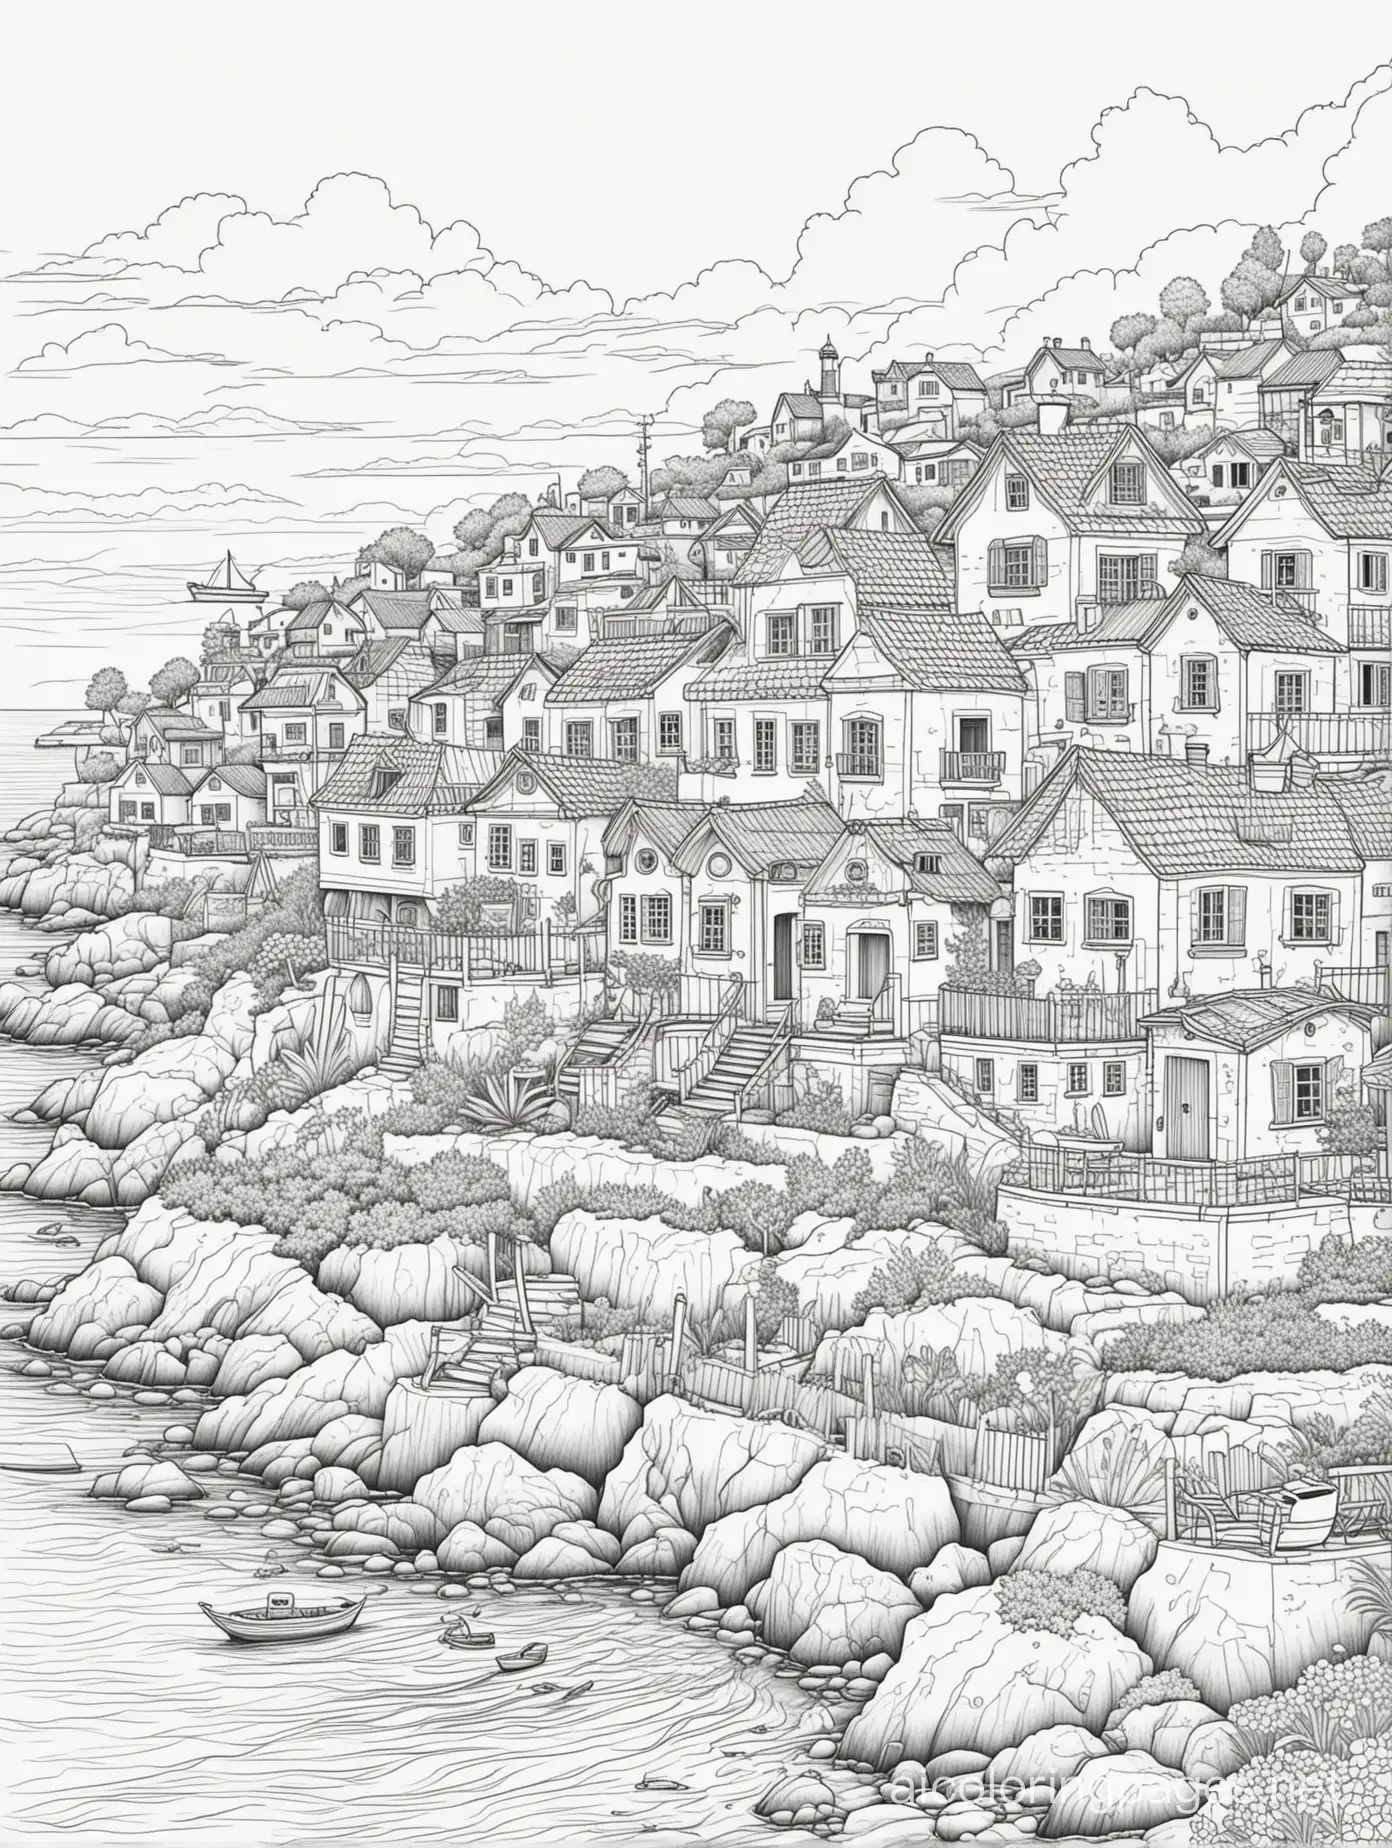 Sea side town with unique houses, Coloring Page, black and white, line art, white background, Simplicity, Ample White Space. The background of the coloring page is plain white to make it easy for young children to color within the lines. The outlines of all the subjects are easy to distinguish, making it simple for kids to color without too much difficulty